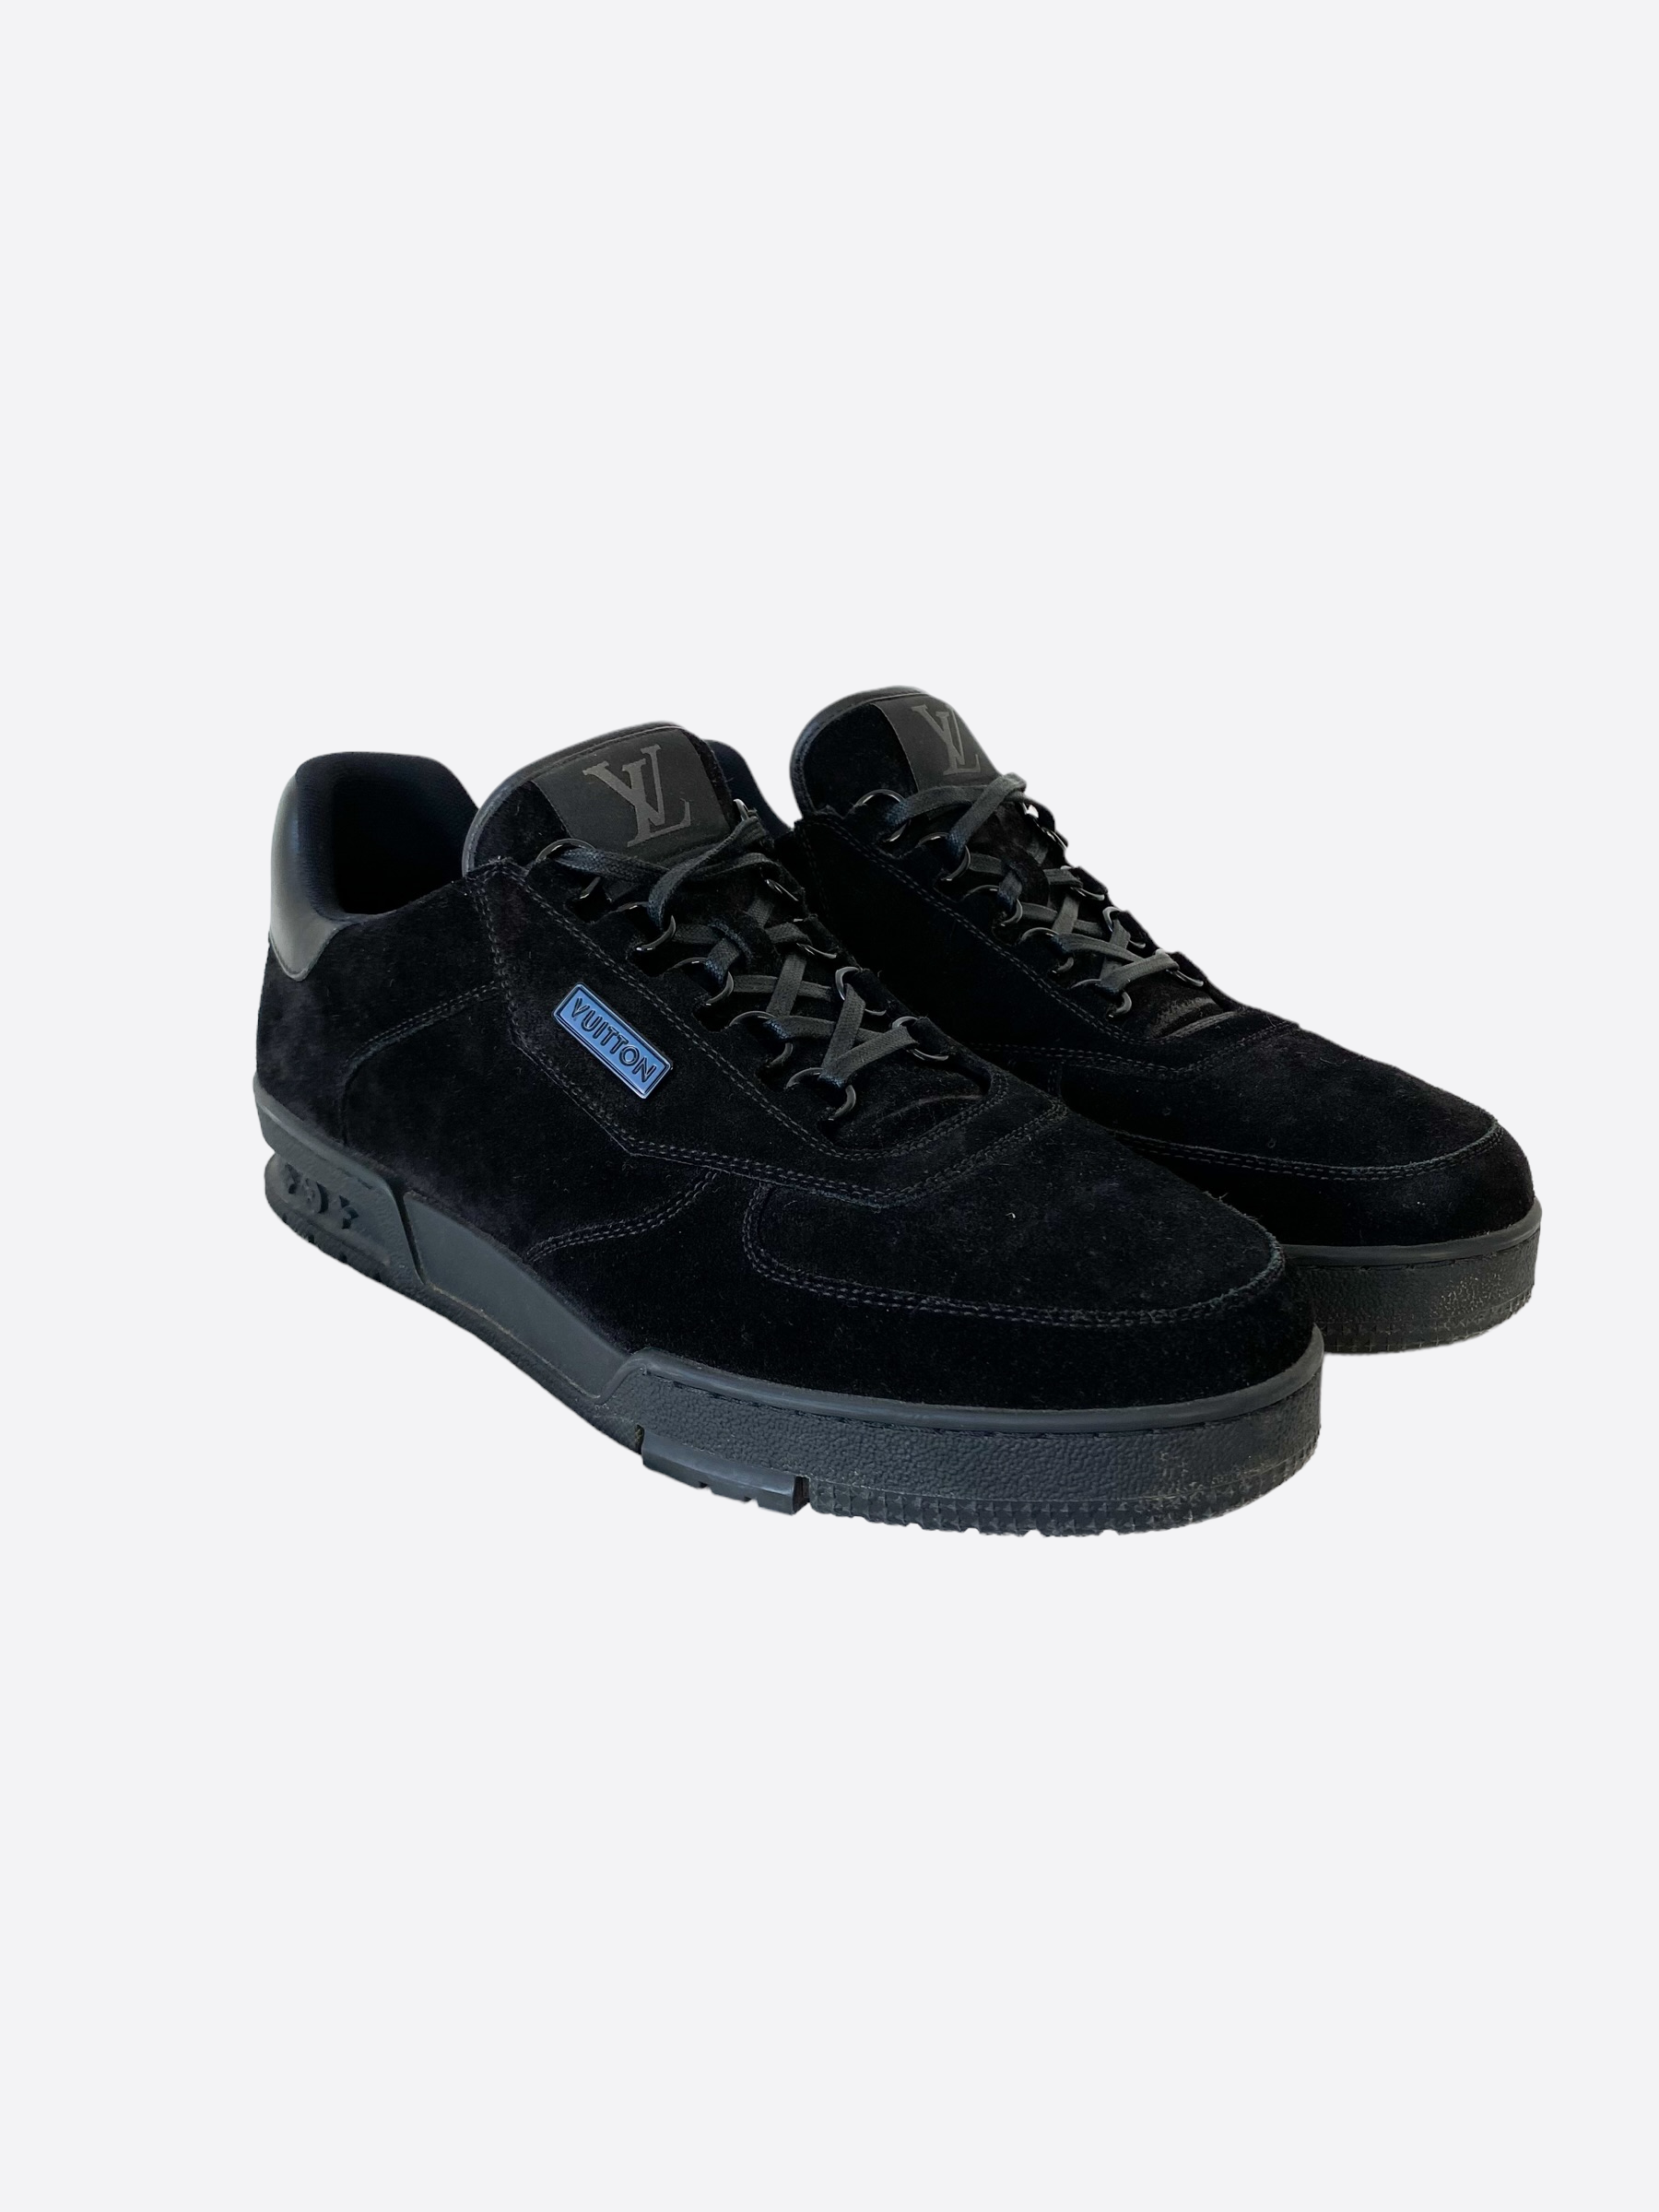 Louis Vuitton Black Suede Employee Exclusive Trainers